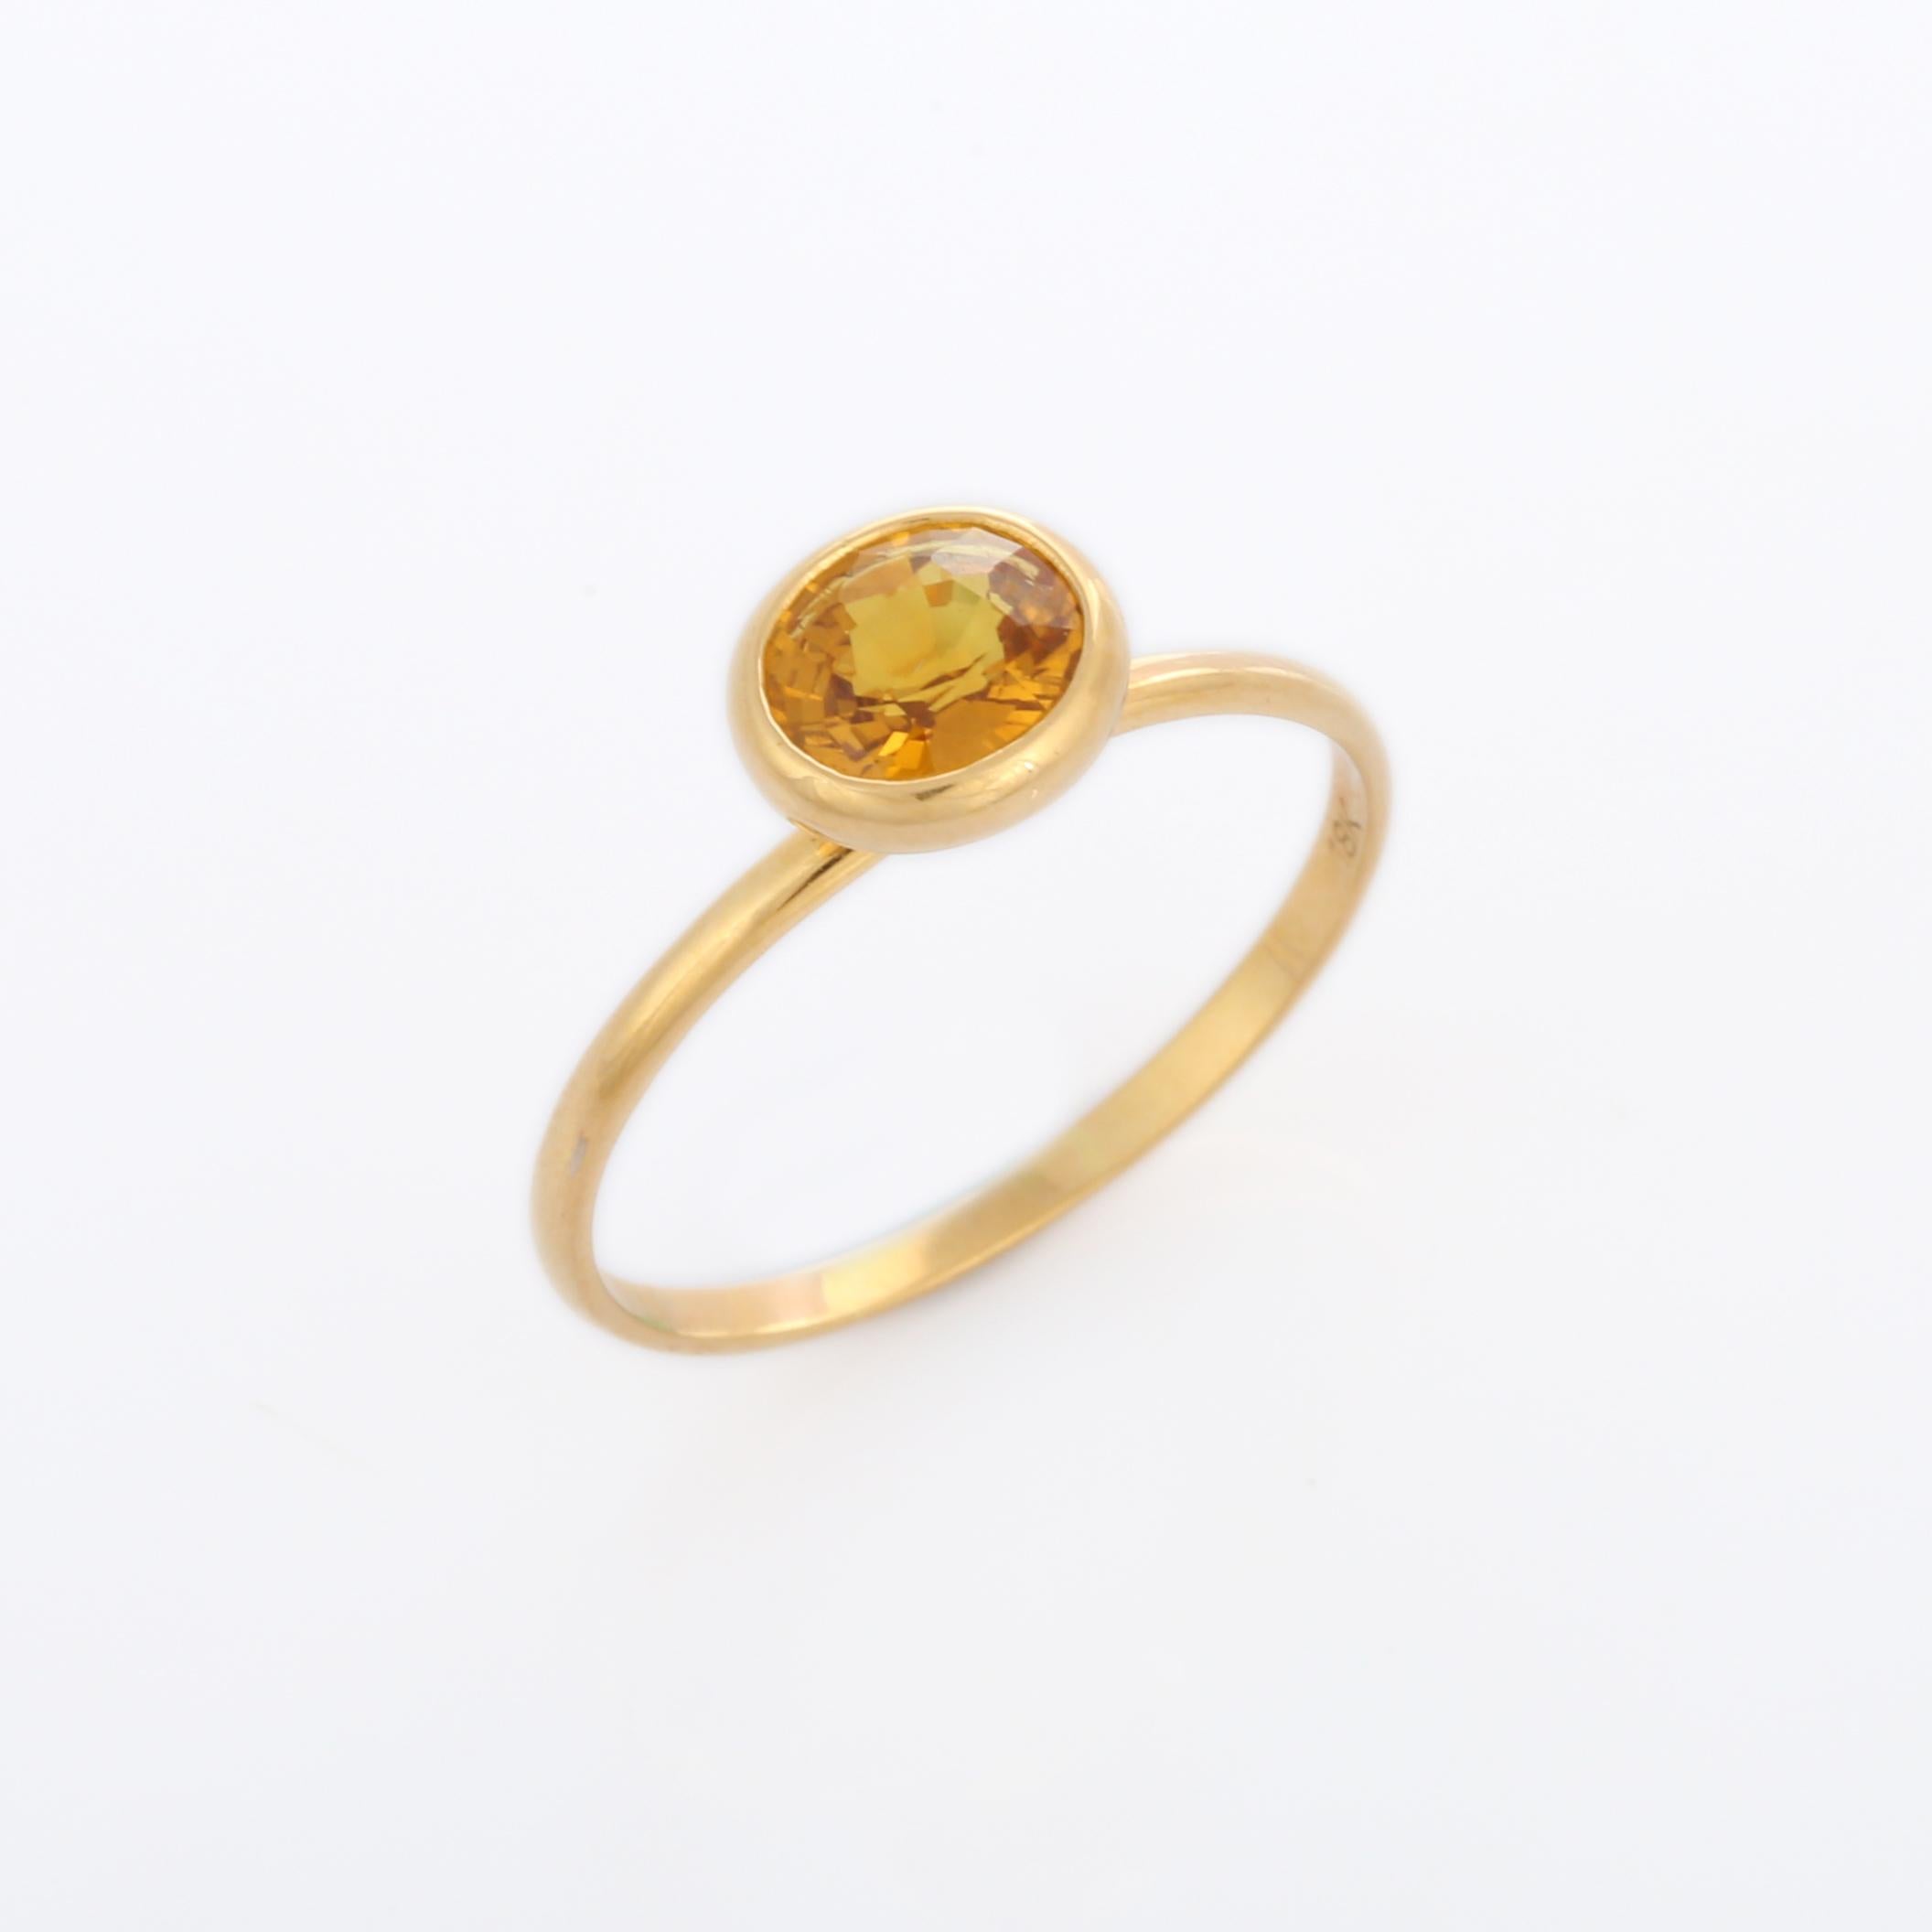 For Sale:  1.05 Carat Yellow Sapphire Solitaire Ring in 18K Yellow Gold 9